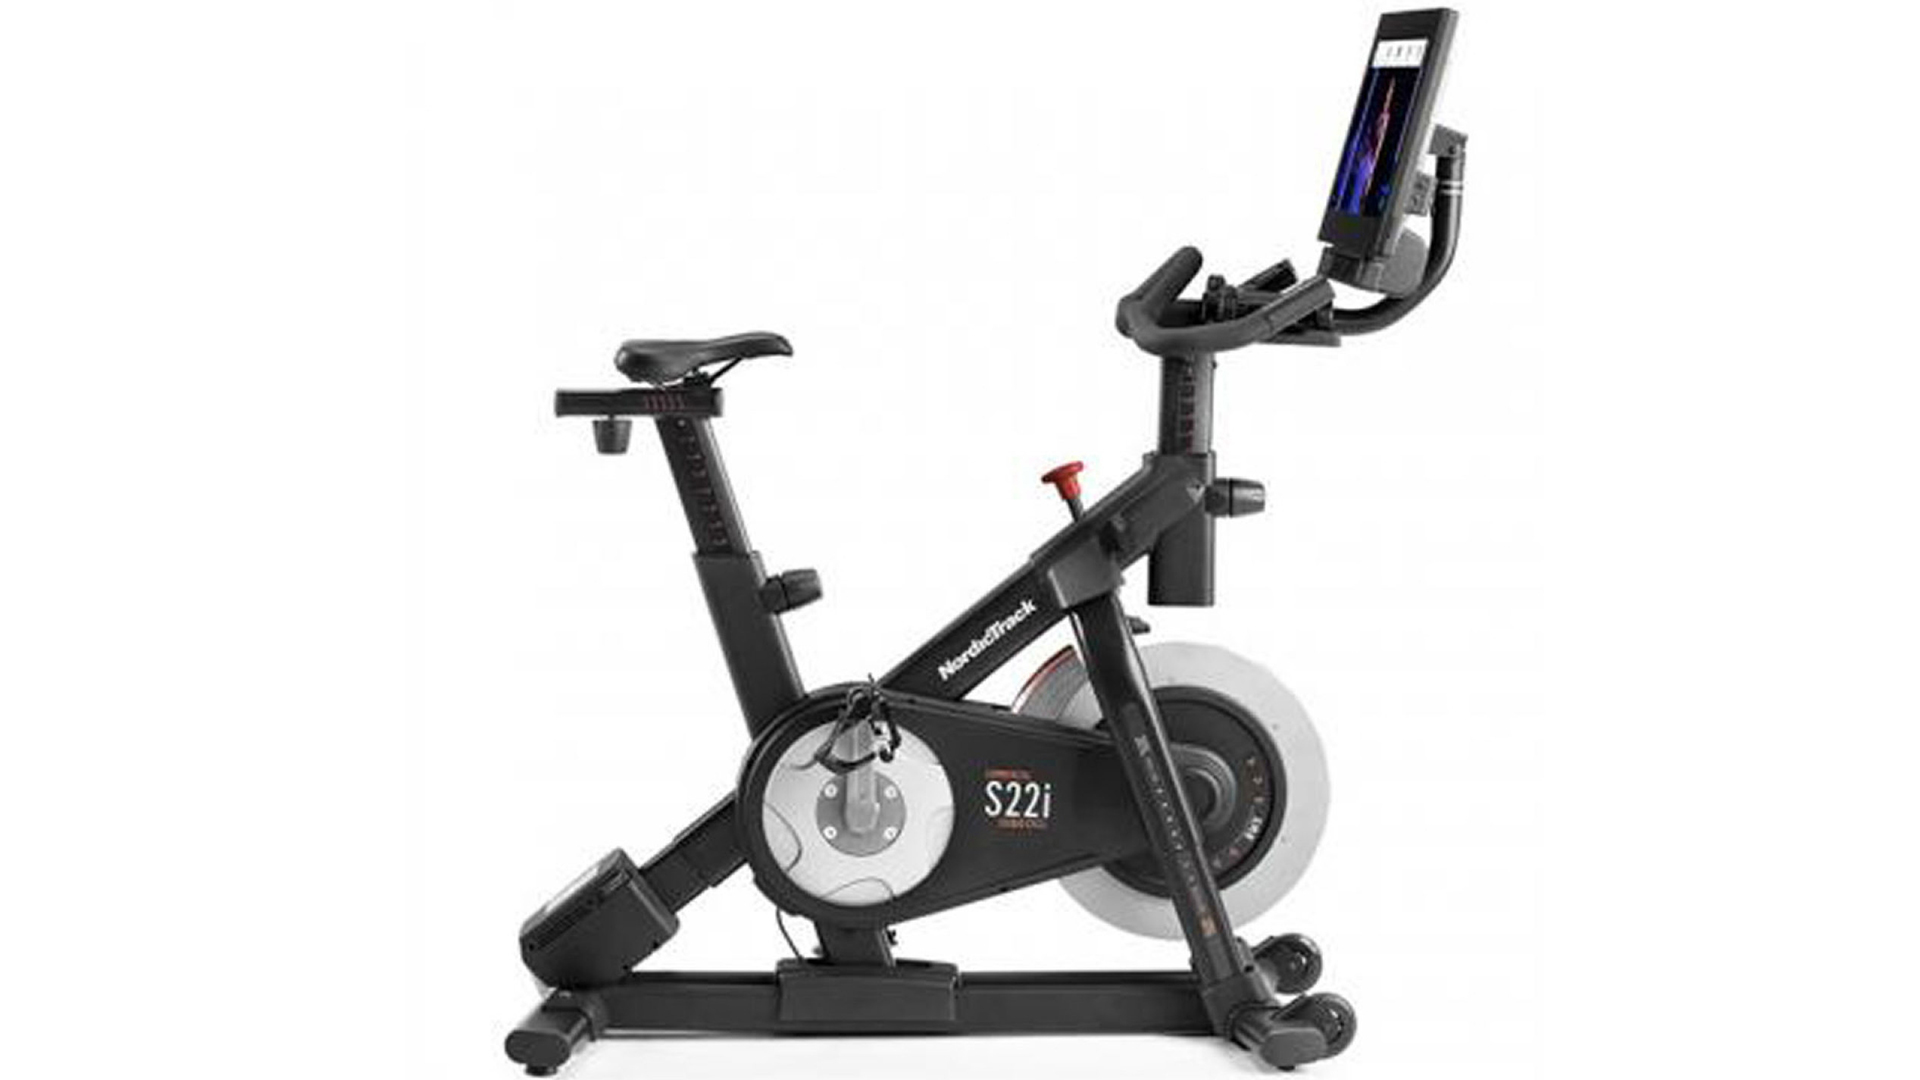 NordicTrack S22i Studio Cycle exercise bike review | Top Ten Reviews